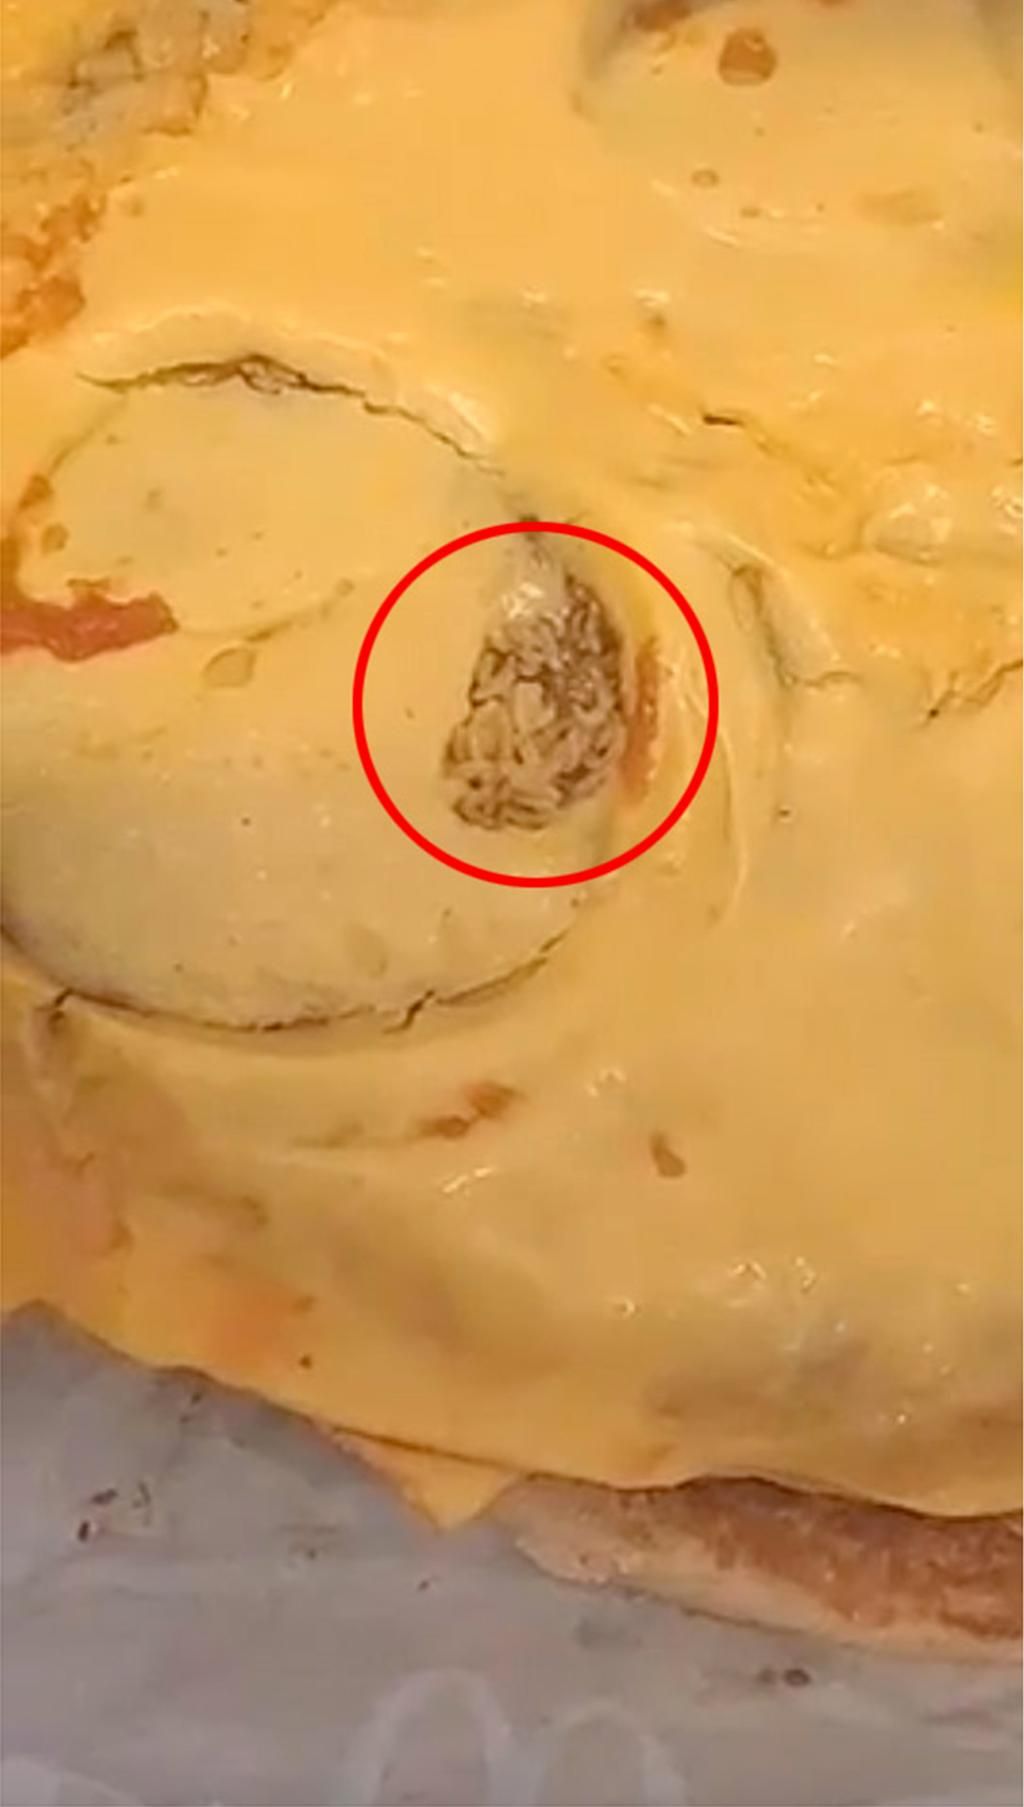 Maggots,Moving And food running In local ohio  mcdonald's